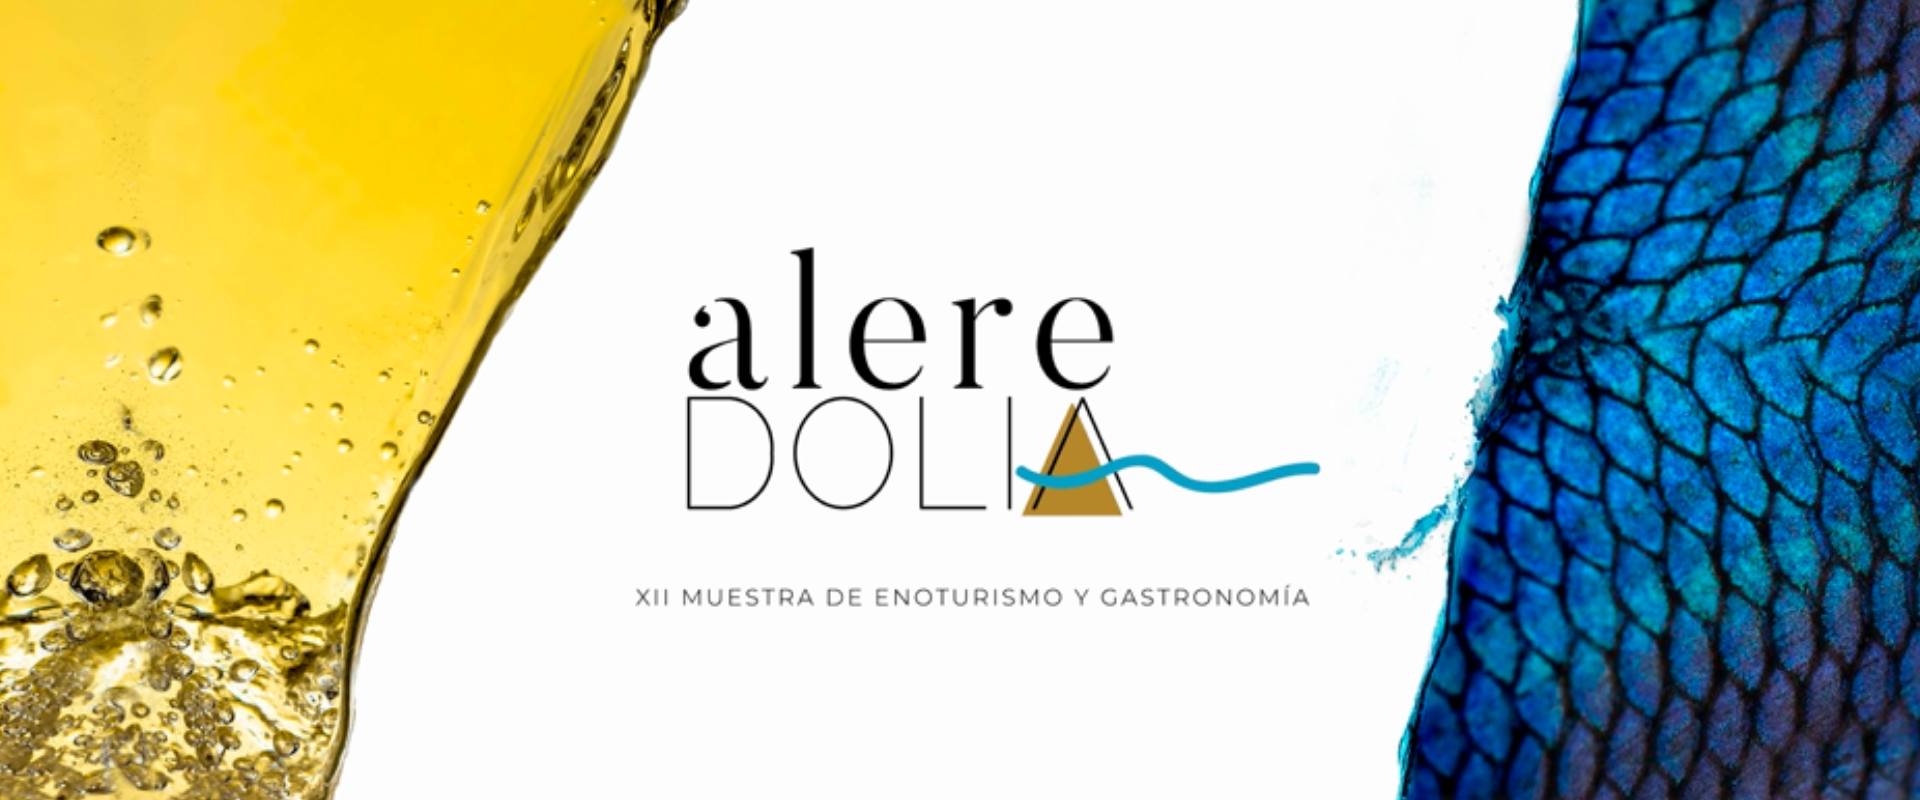 Discover the Magic of Alere/Dolia: Territory and Flavor in an idyllic setting